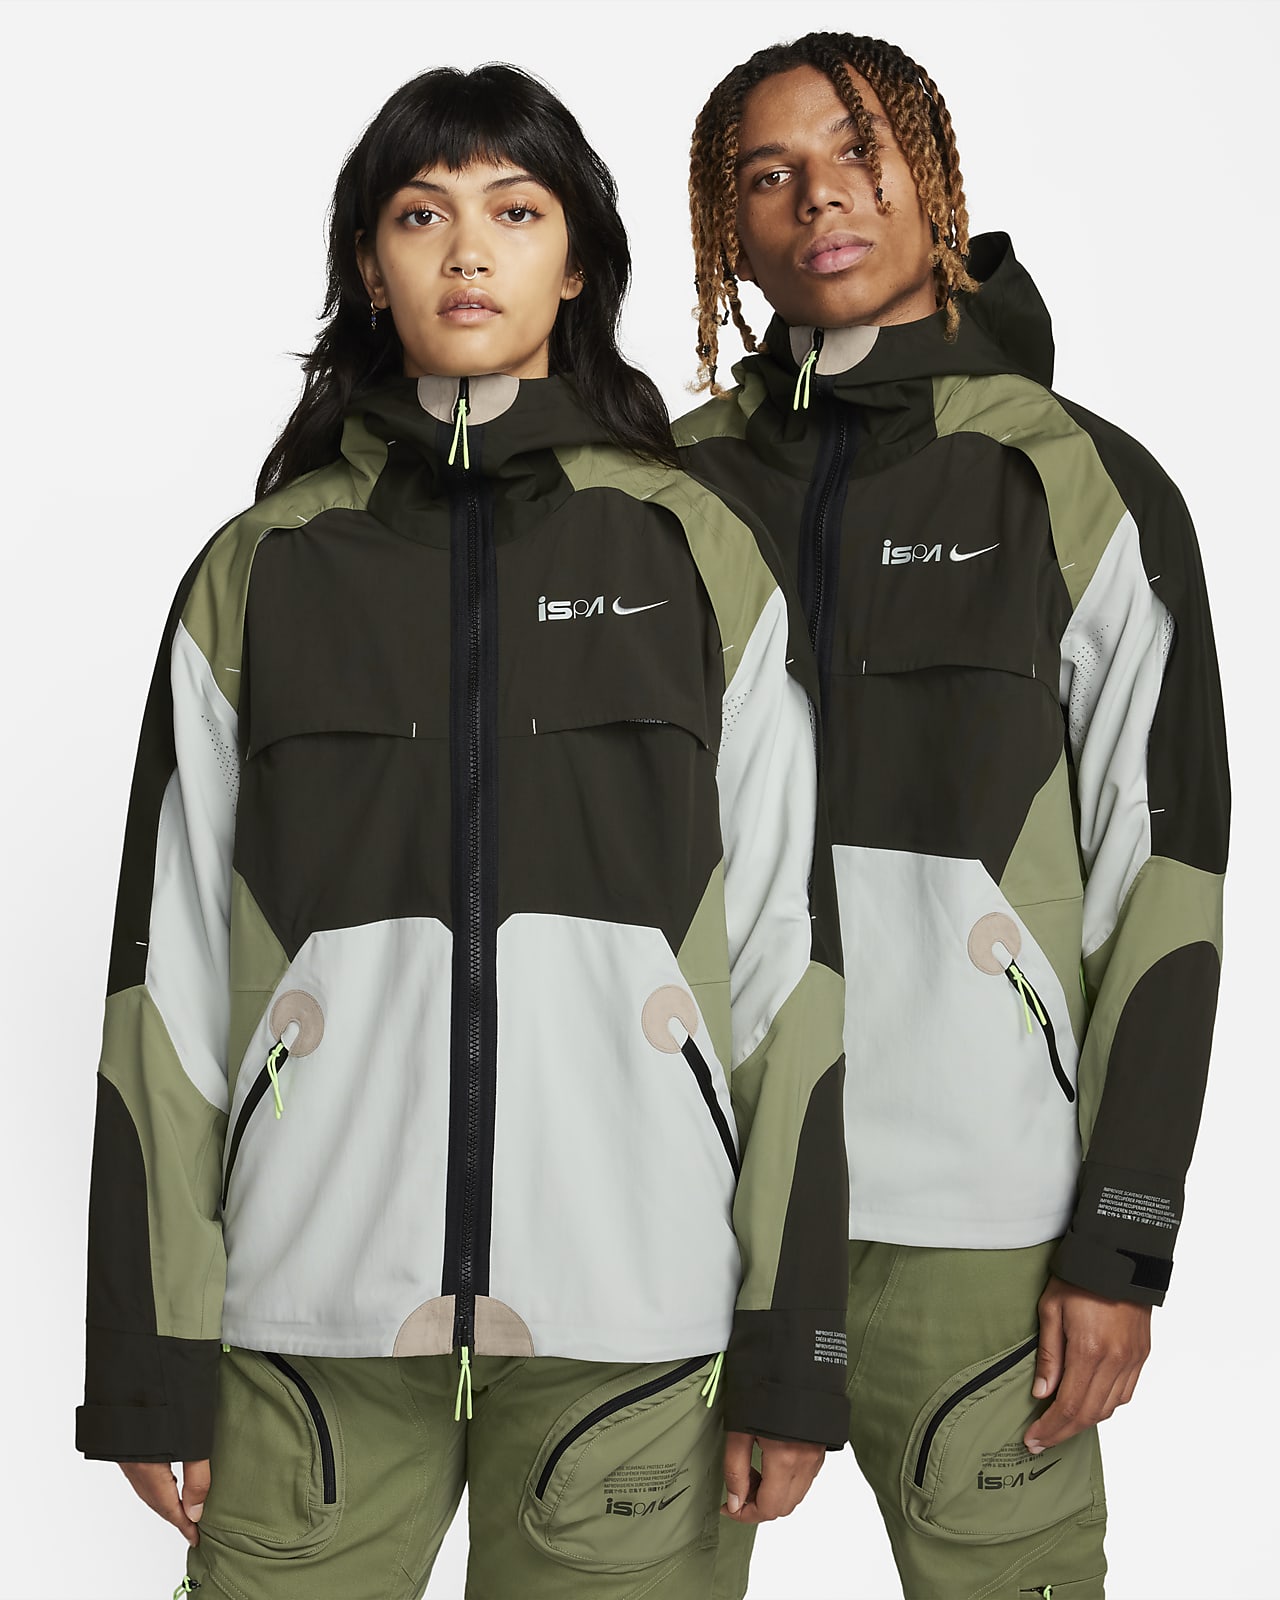 https://static.nike.com/a/images/t_PDP_1280_v1/f_auto,q_auto:eco/a90ad815-f355-4d52-af93-e1def52b26c1/ispa-jacket-bnbM9W.png